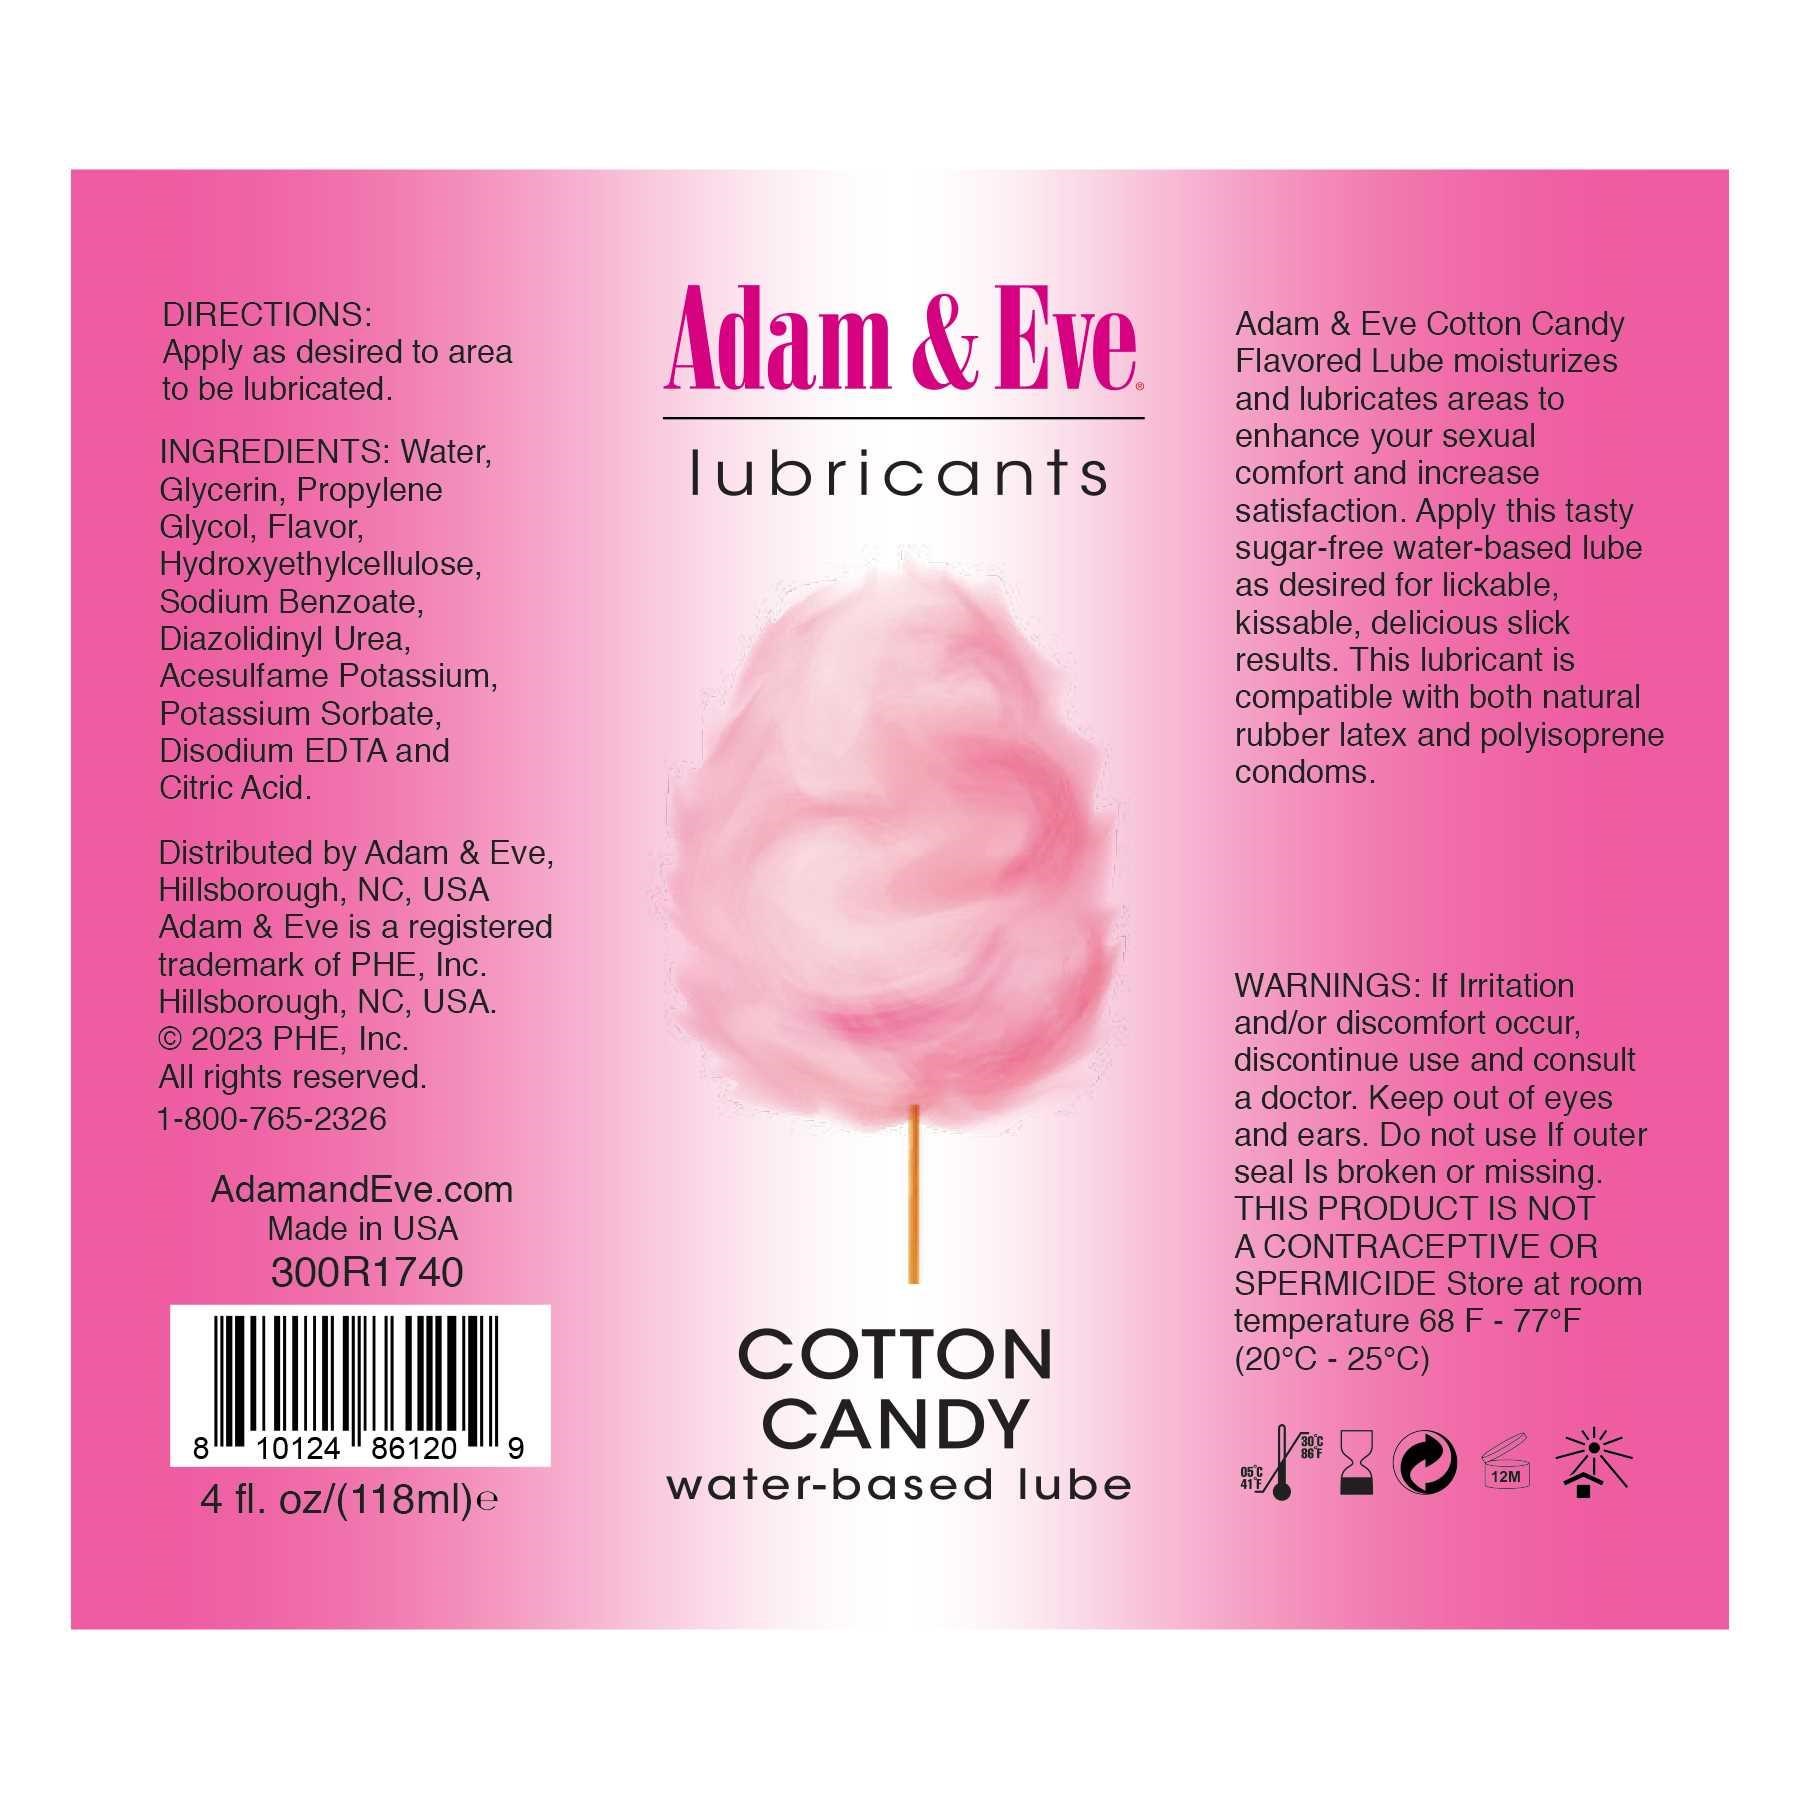 Adam & Eve Flavored Lubricants